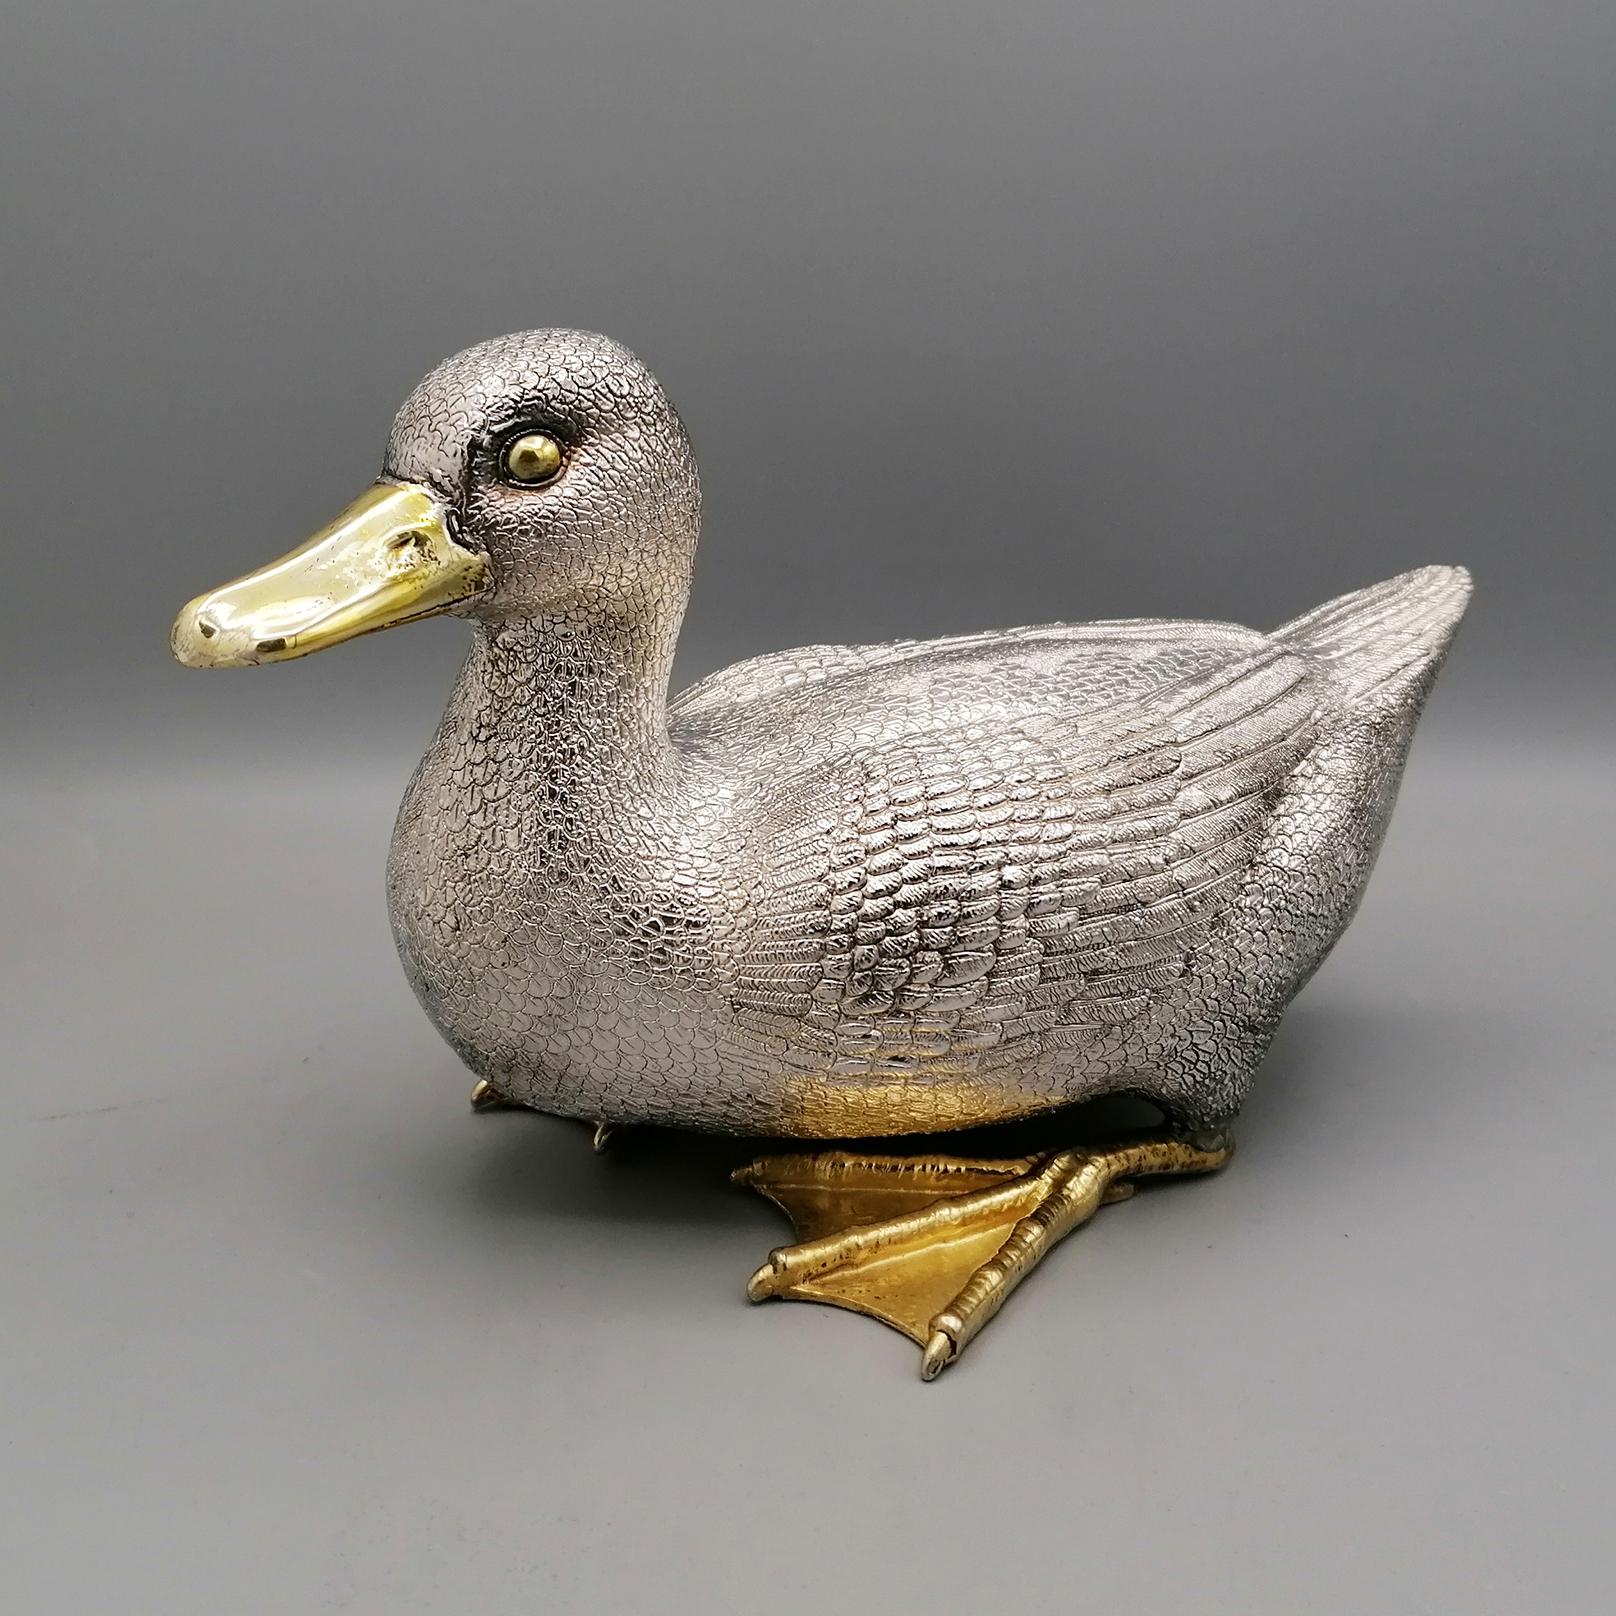 Pure silver duck made with the lost wax technique.
The duck was made with the 